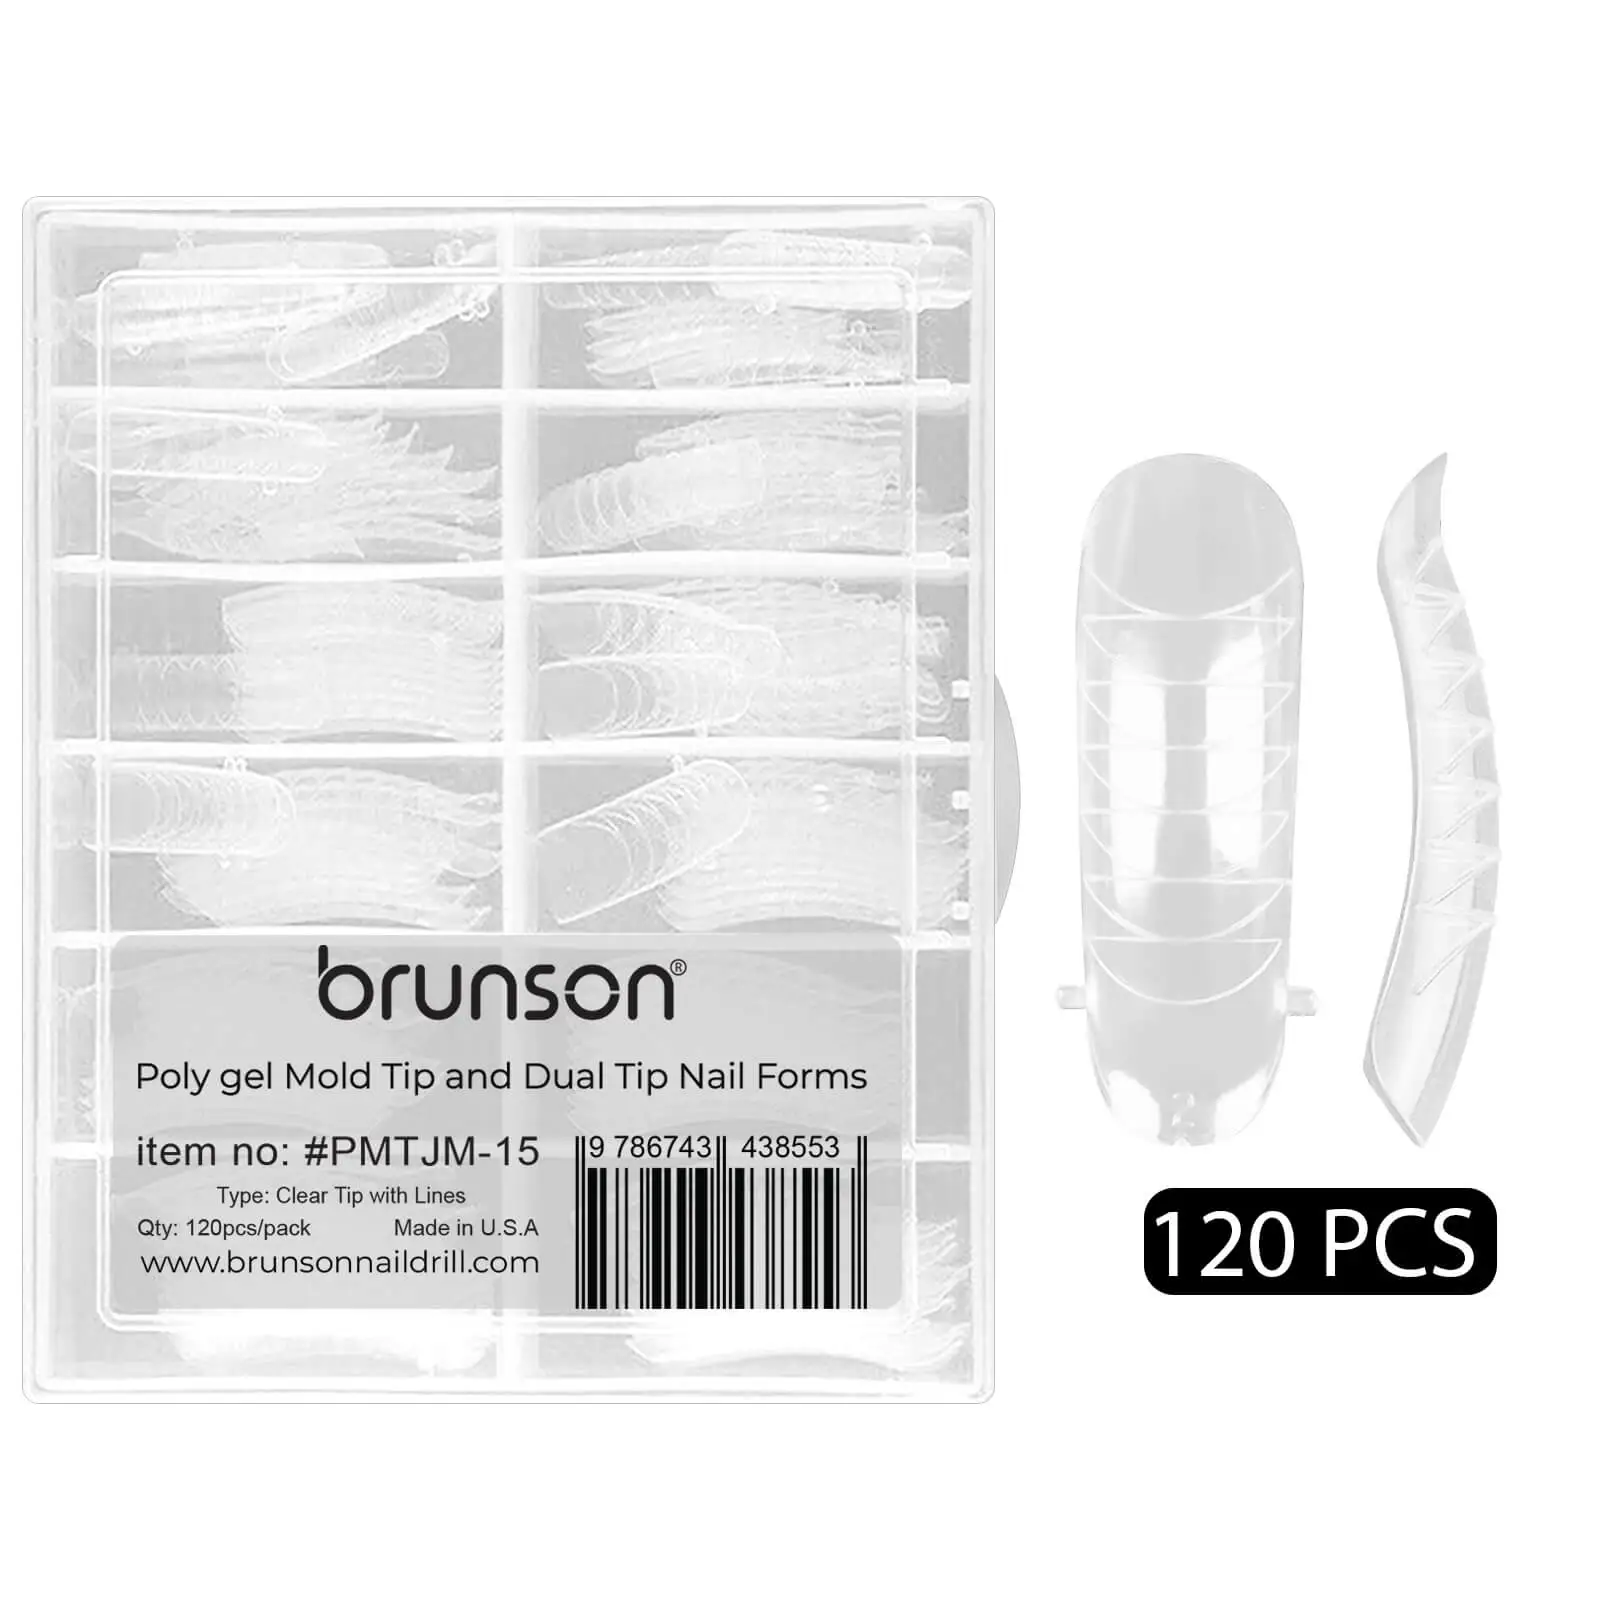 Poly-Gel-Mold-Tip-and-Dual-Tip-Nail-Forms-PMDTD-12-Brunson 1